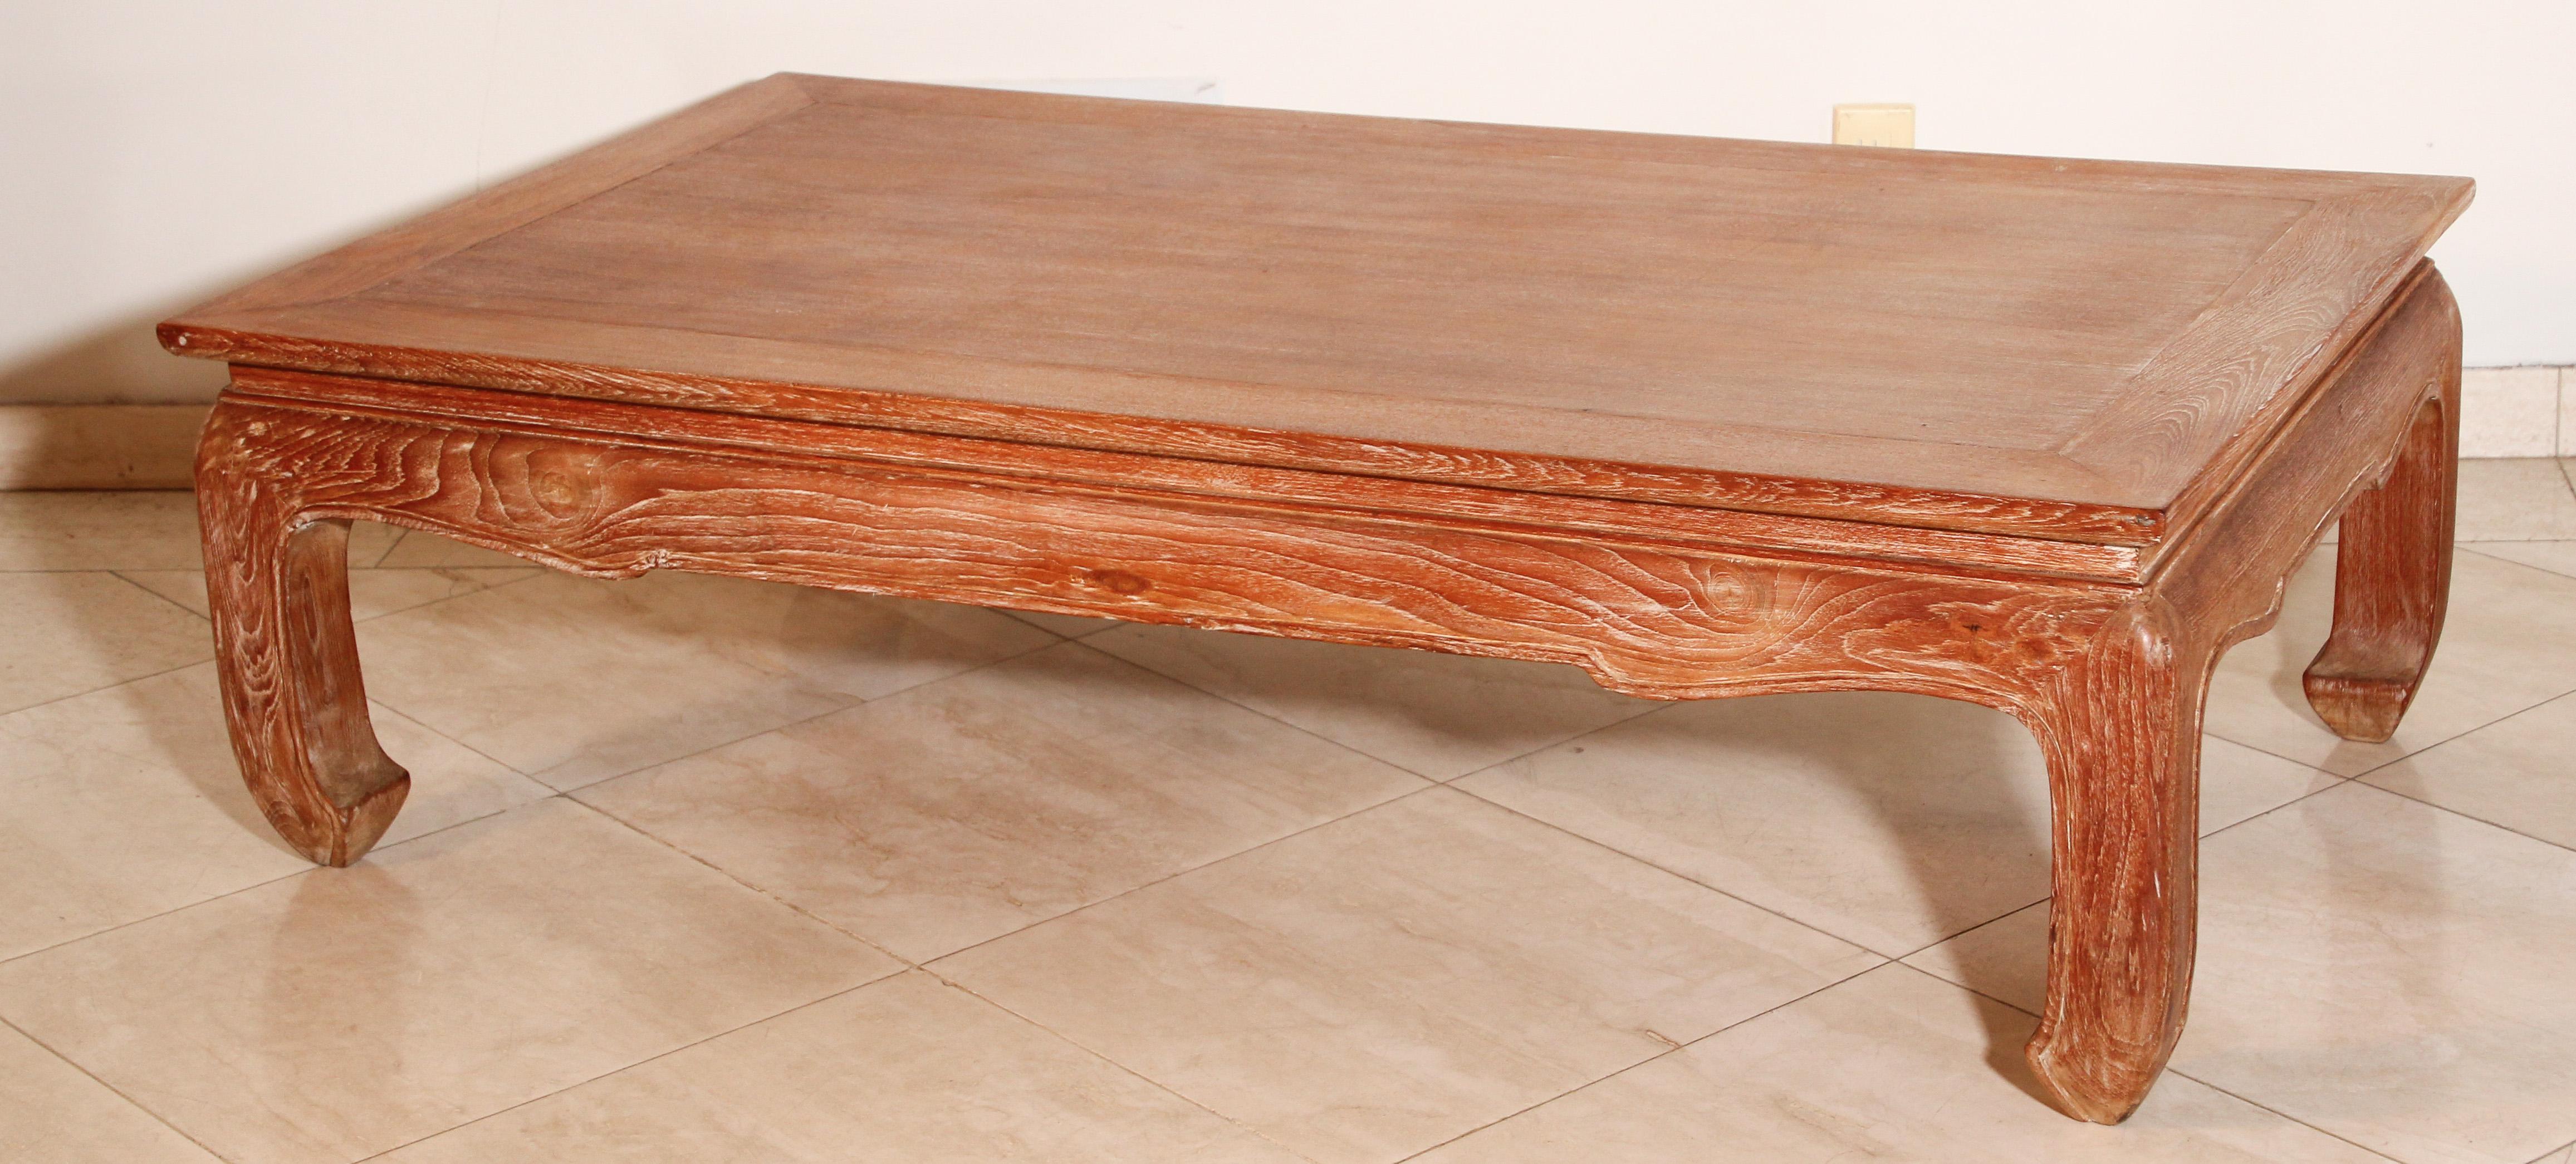 Large Asian opium teak wood rectangular coffee table.
Large rounded very nicely carved legs and sides and the corners.
Low bajot table with beautiful signs of age and use.
Classic curved inward four legs coffee table. The Opium coffee table